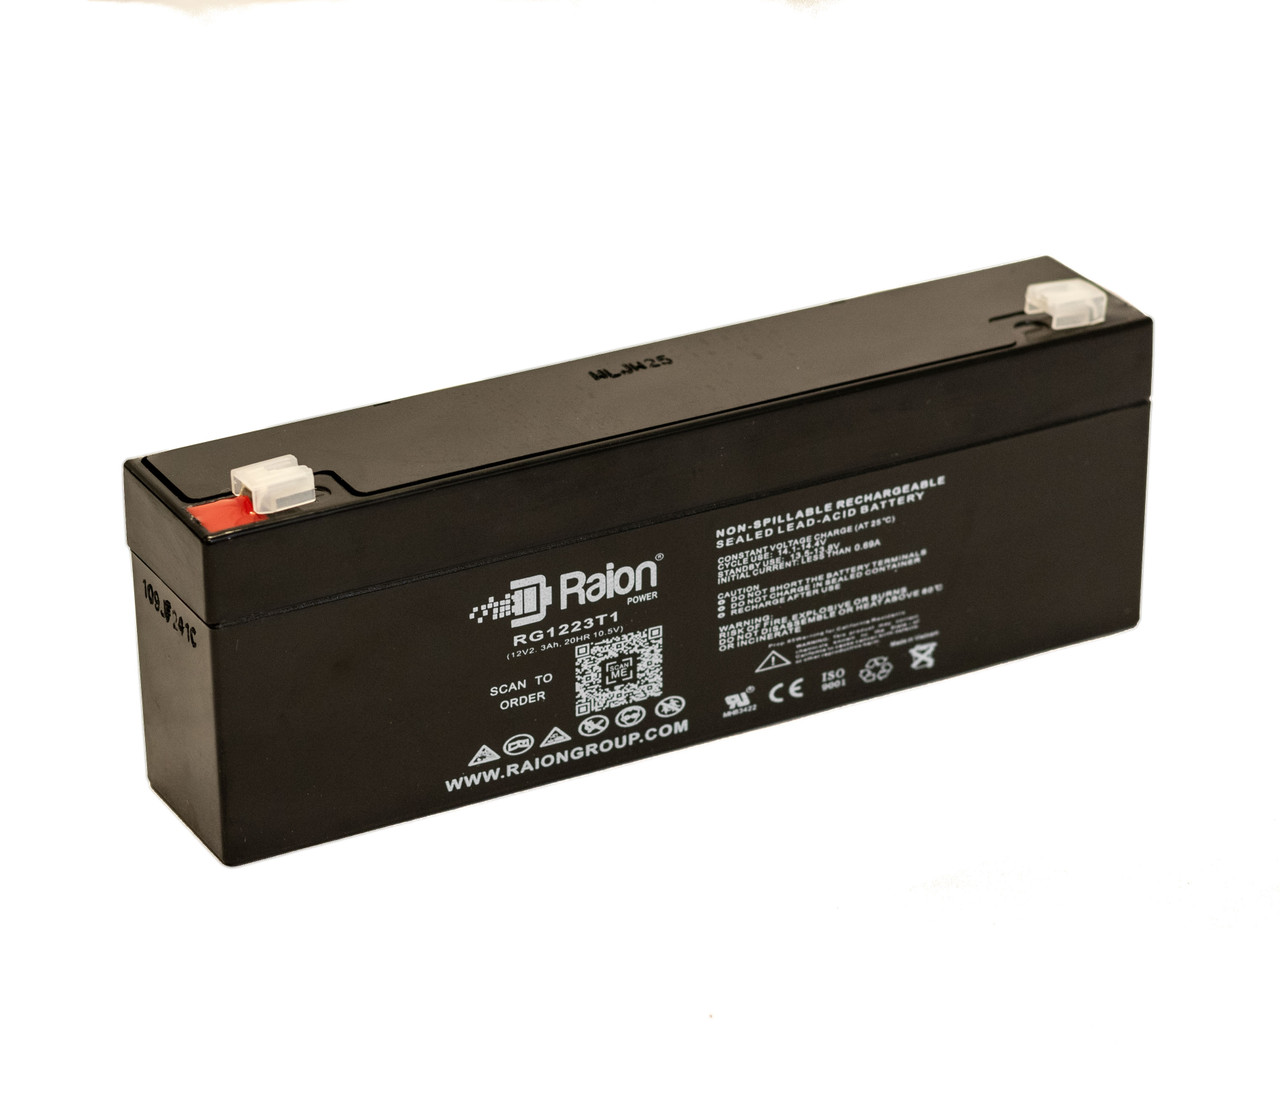 Raion Power RG1223T1 Replacement Battery for Unipower B11131